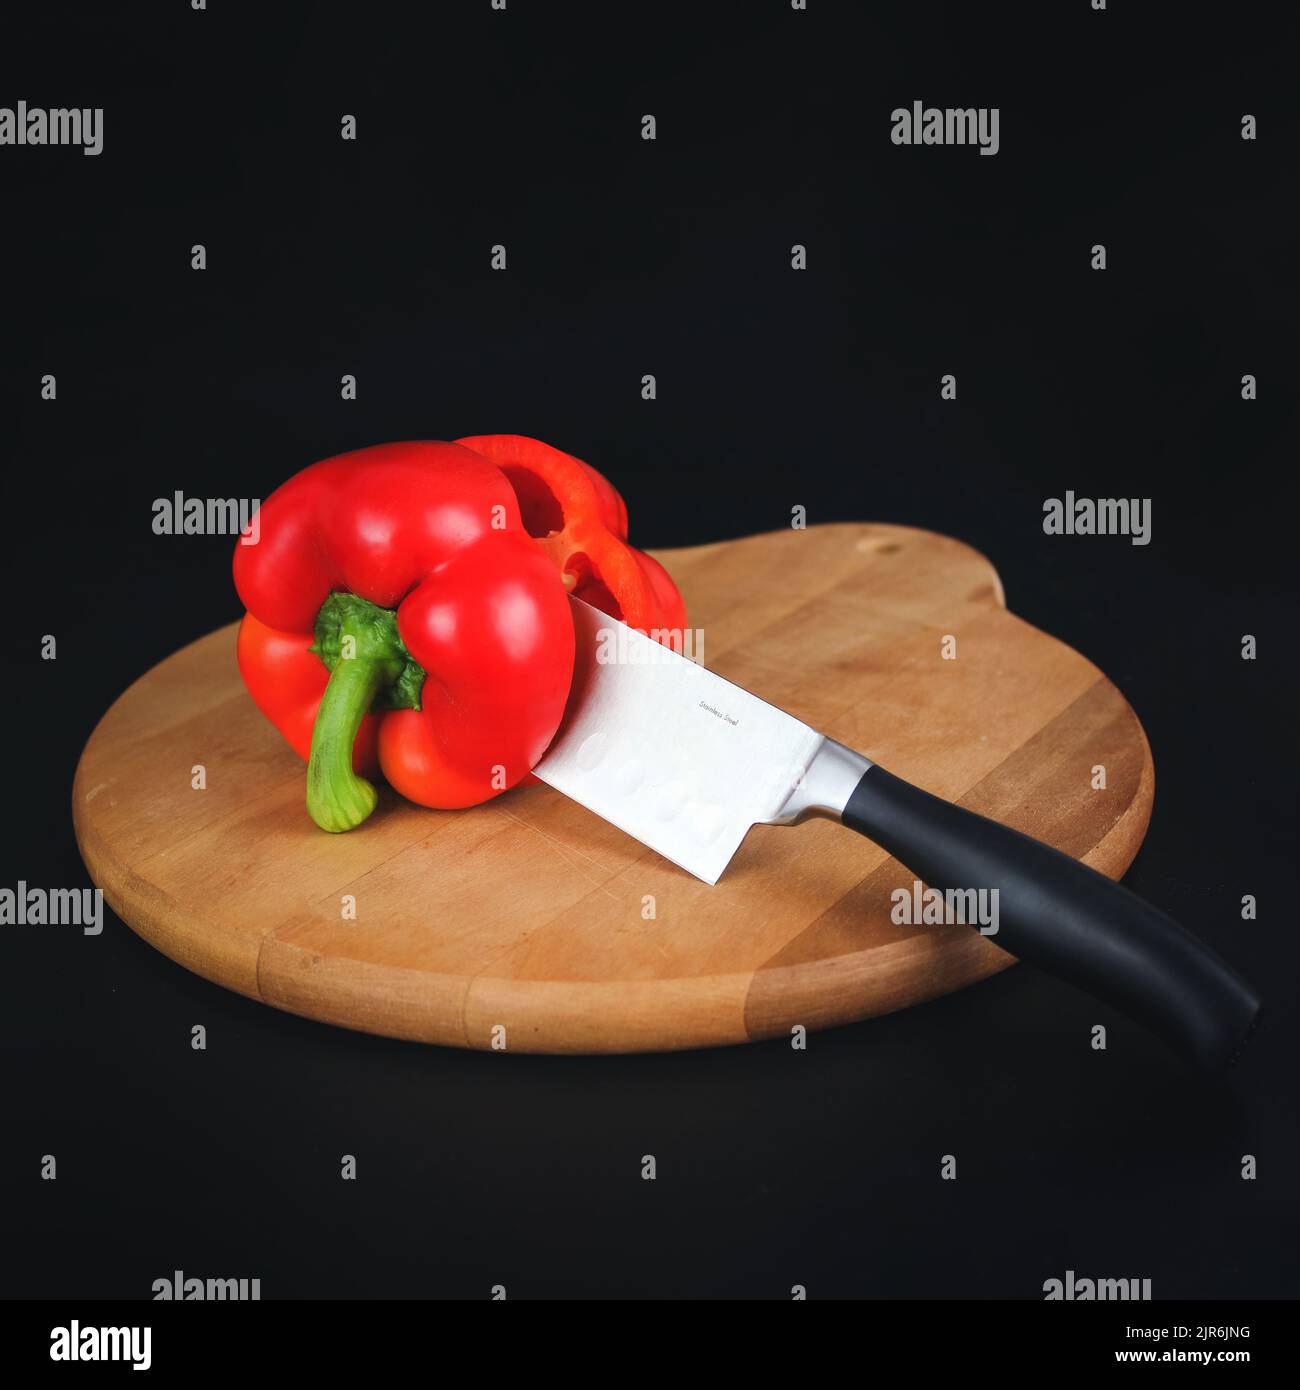 Big kitchen knife cut a bell pepper on two parts close up on wooden board. Stock Photo